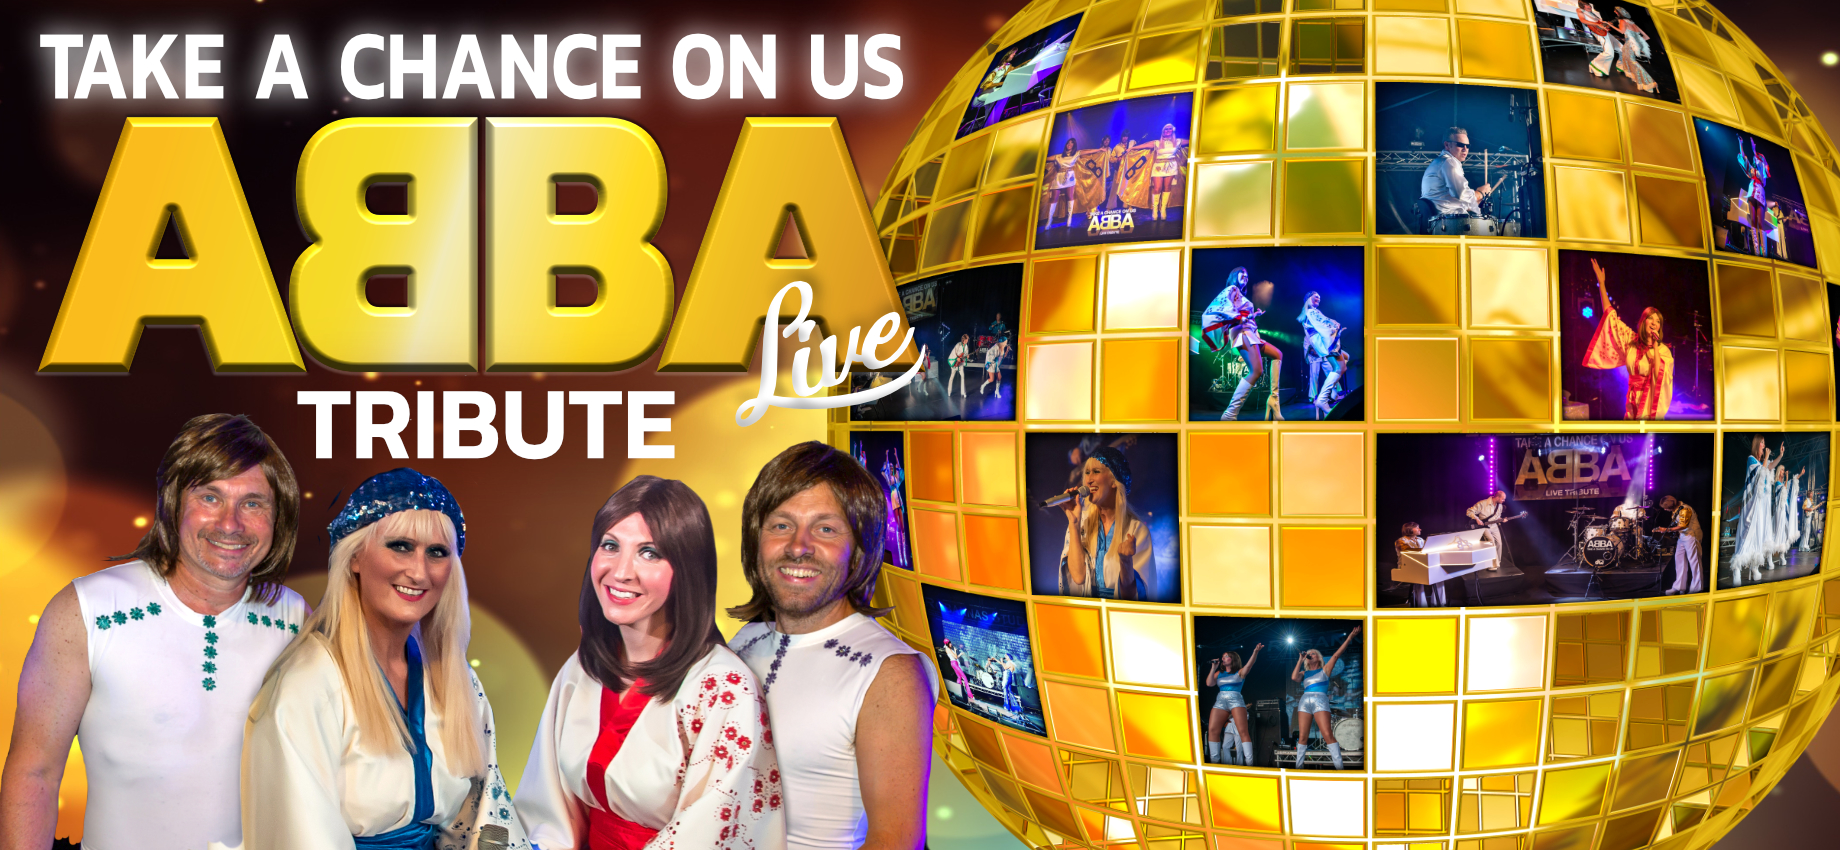 Take a Chance on Us ABBA Tribute